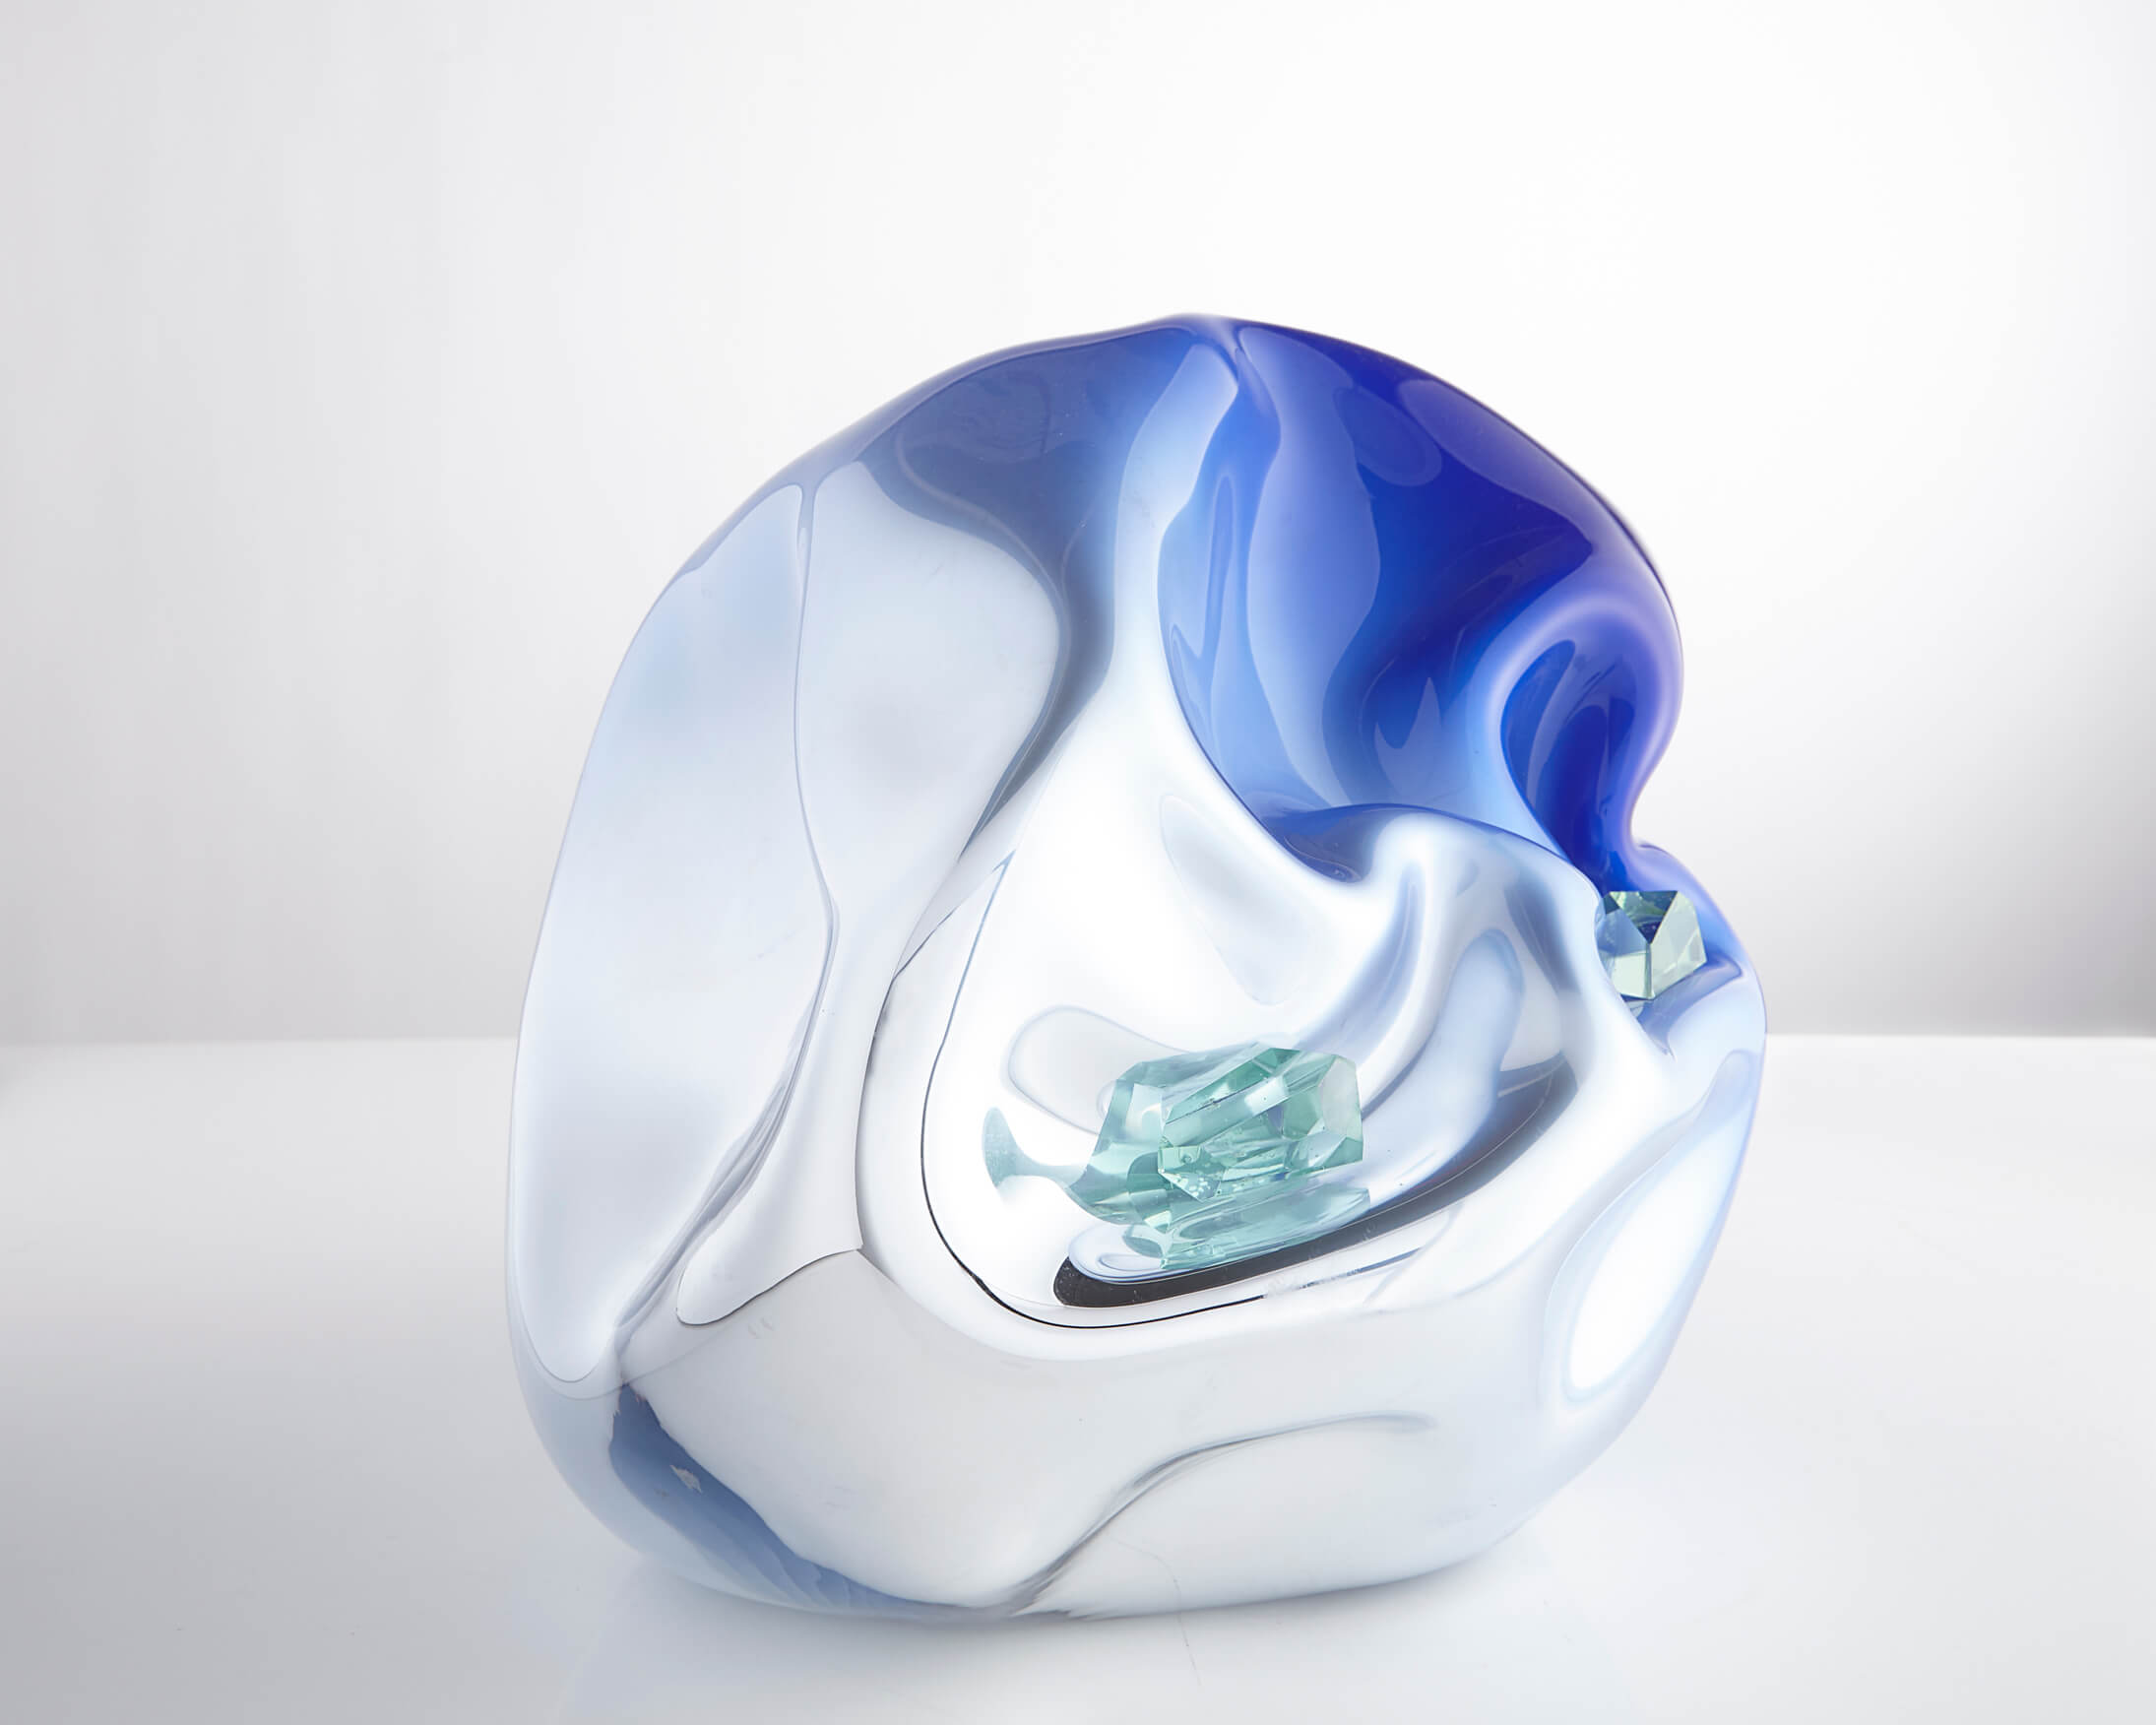 Unique crumpled sculptural vessel with mirrorized surface and applied ...